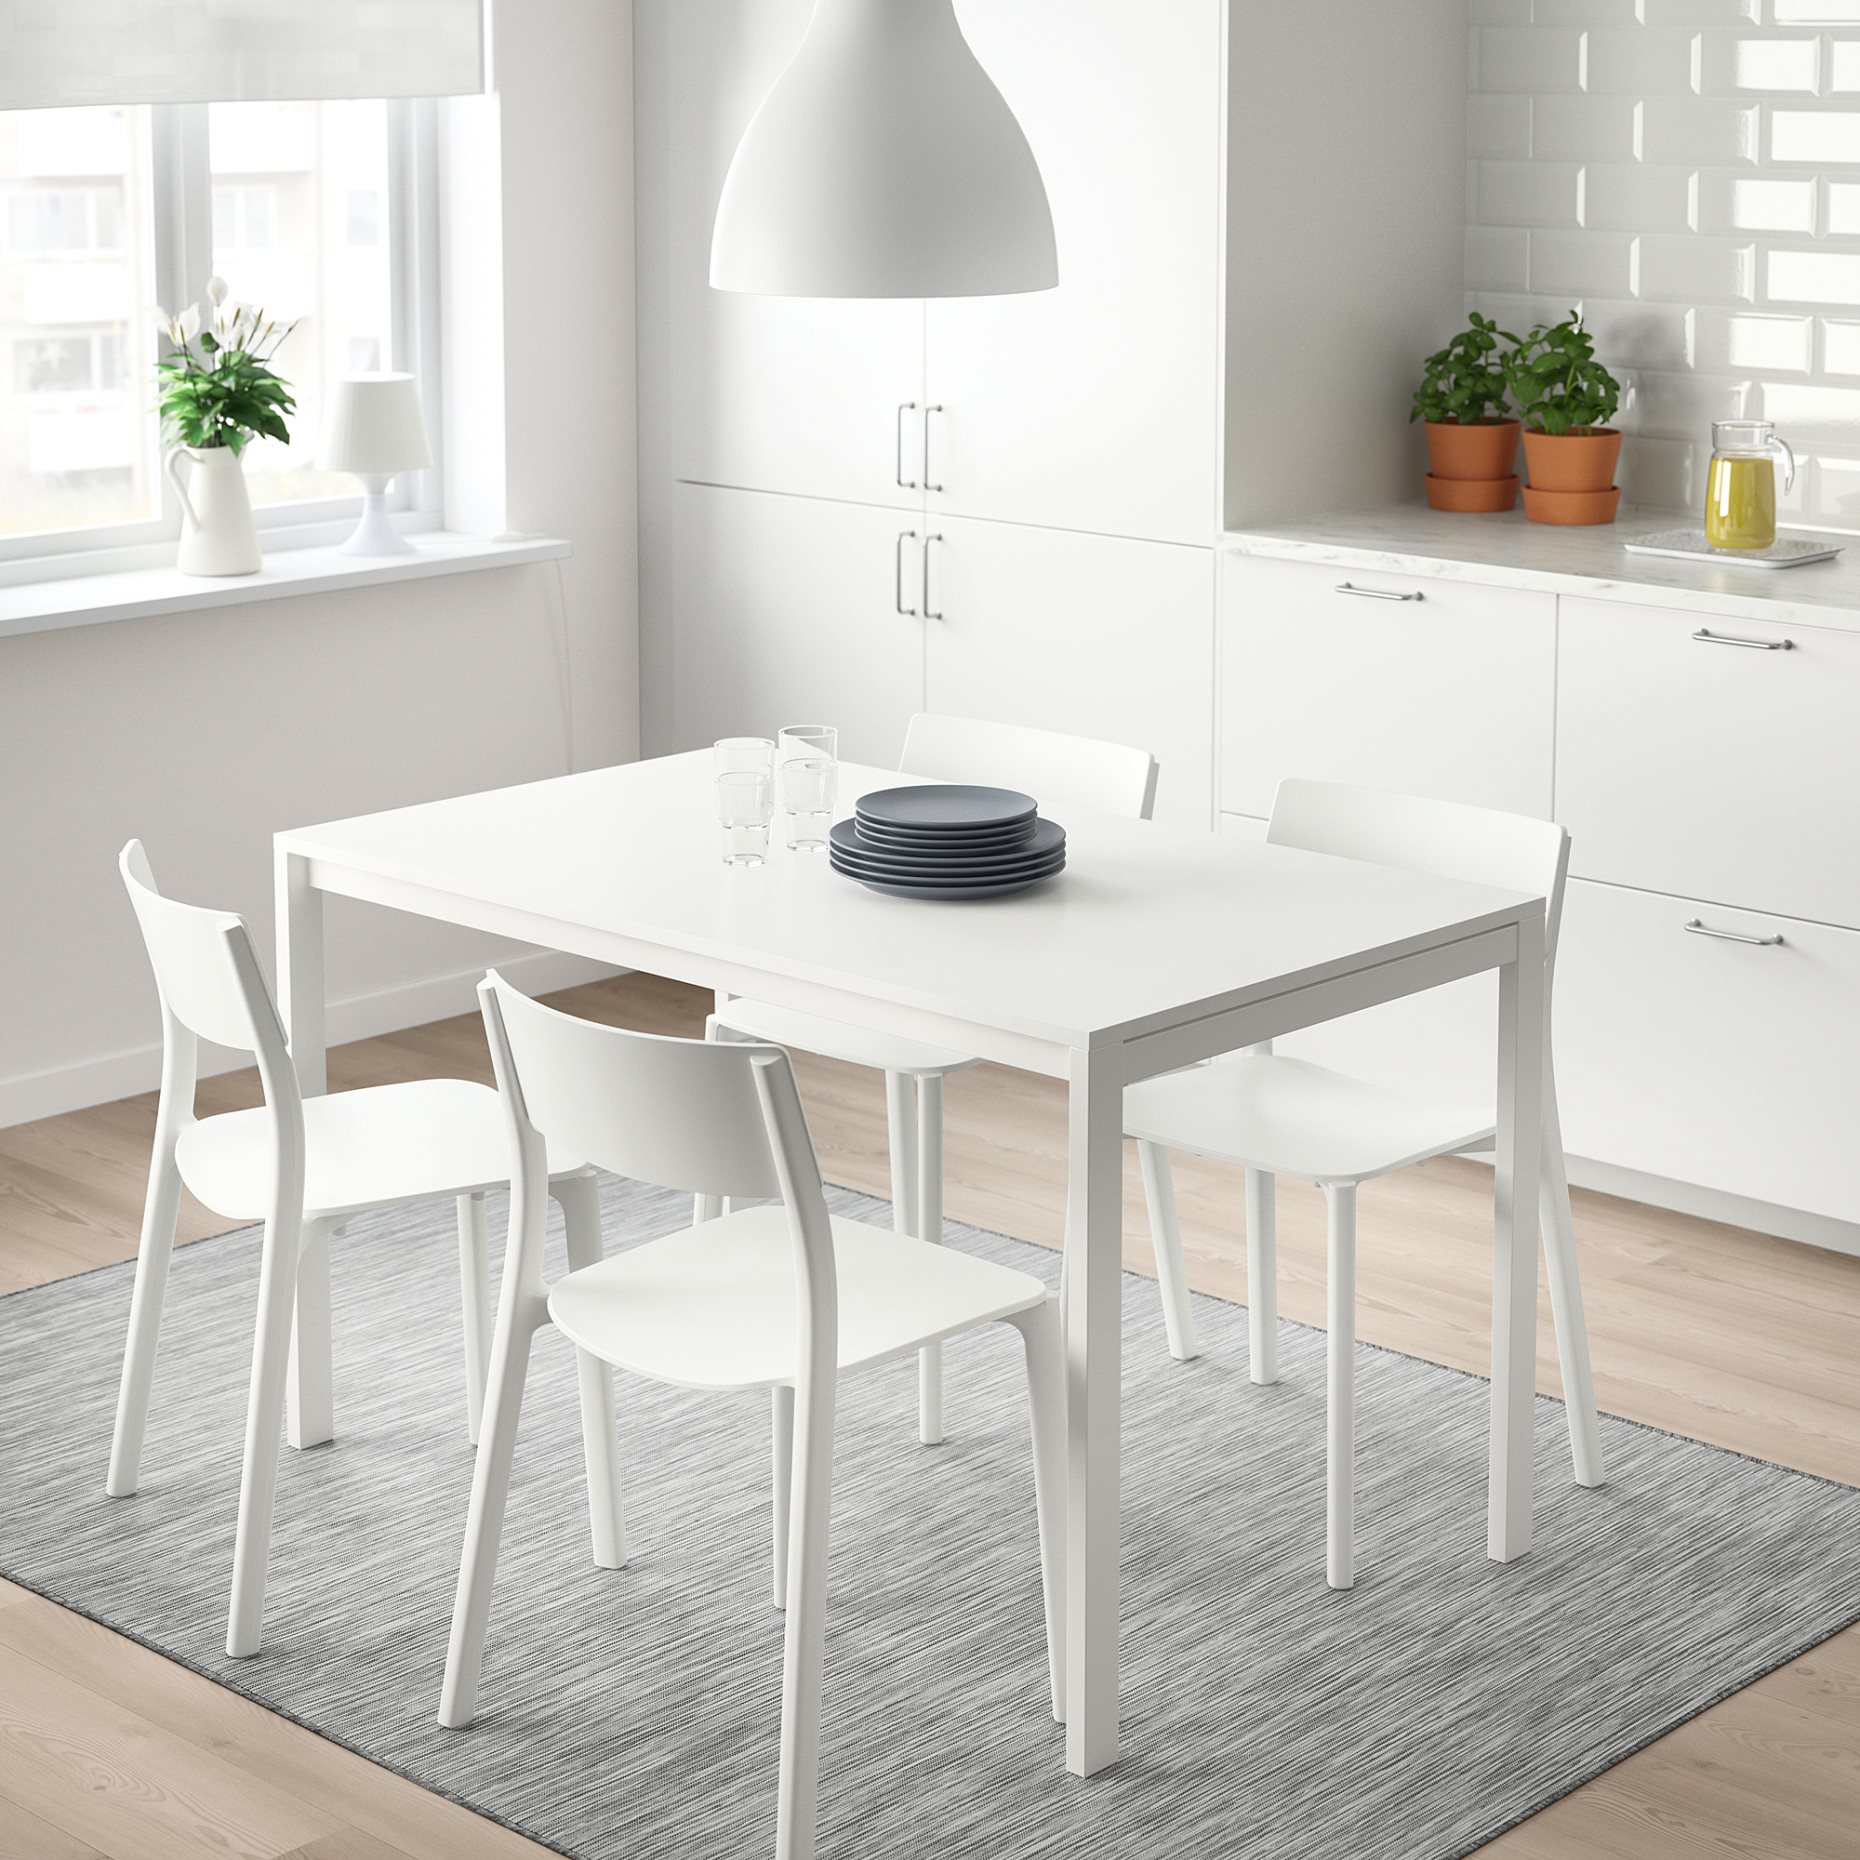 MELLTORP/JANINGE, table and 4 chairs, 591.614.87